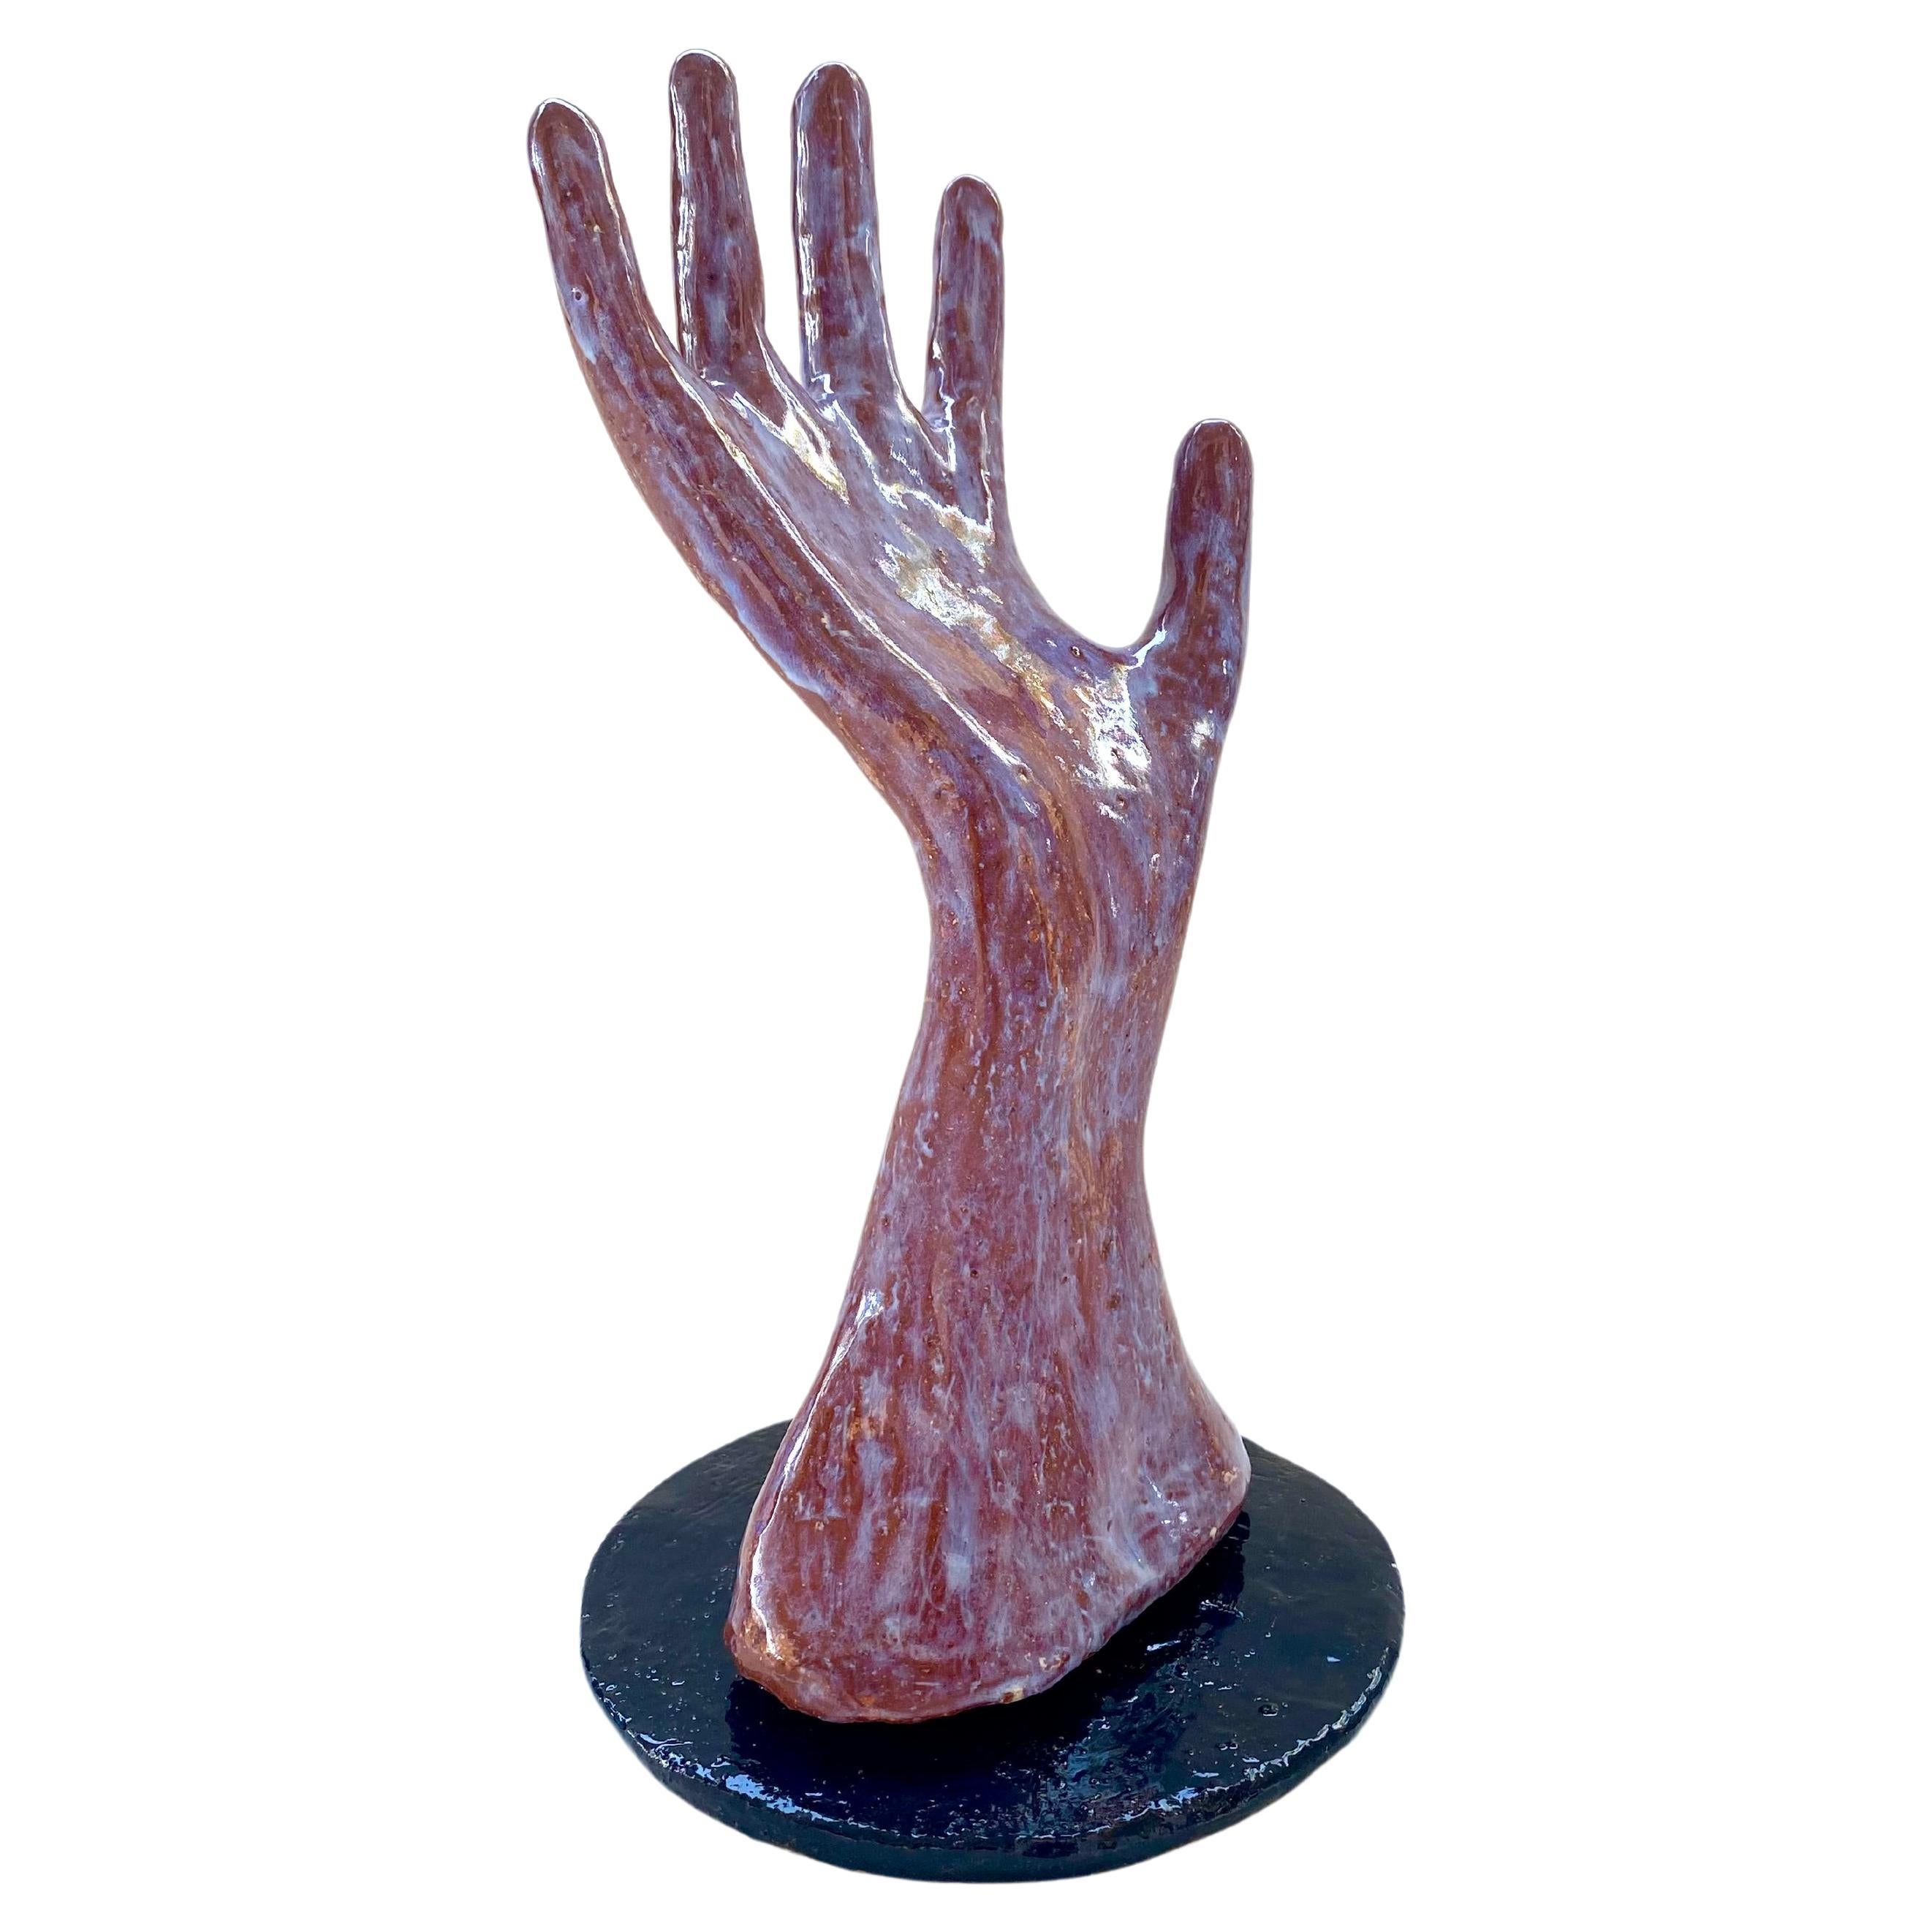 Hand Made Sculptural Glazed Ceramic Hand Jewelry Display Functional Art